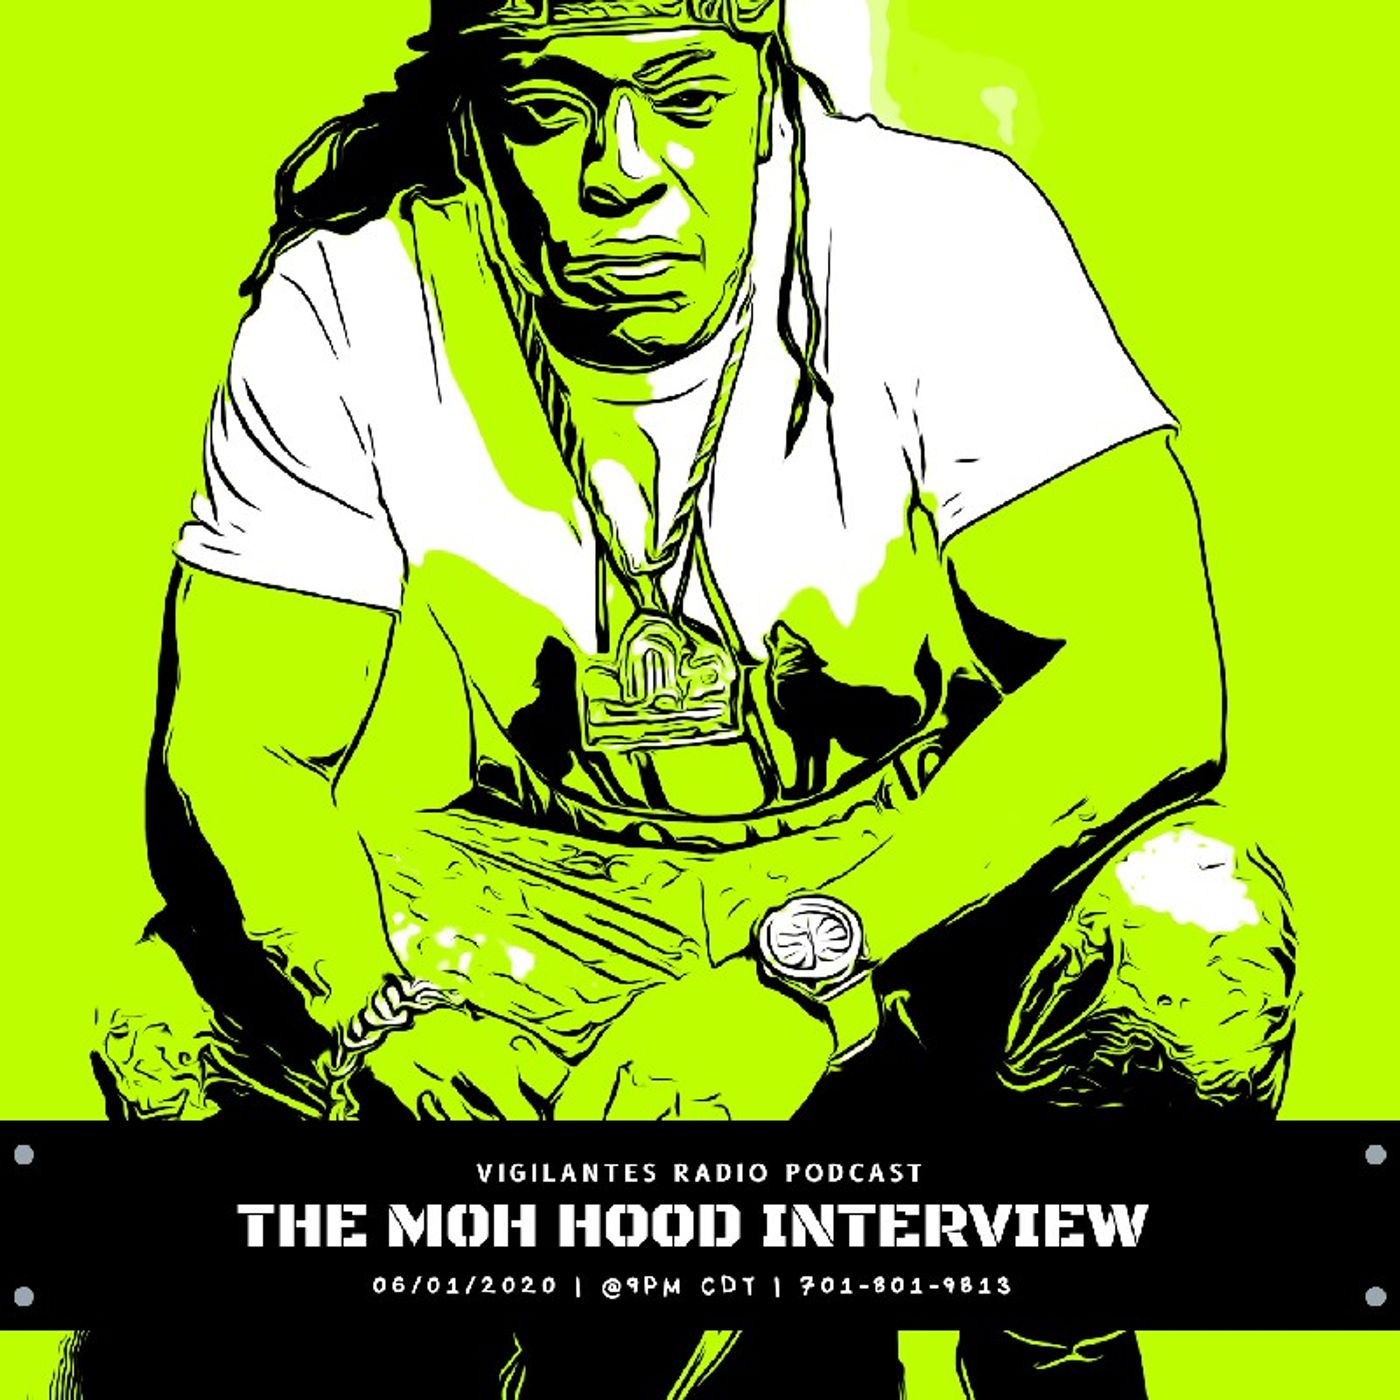 The Moh Hood Interview. Image